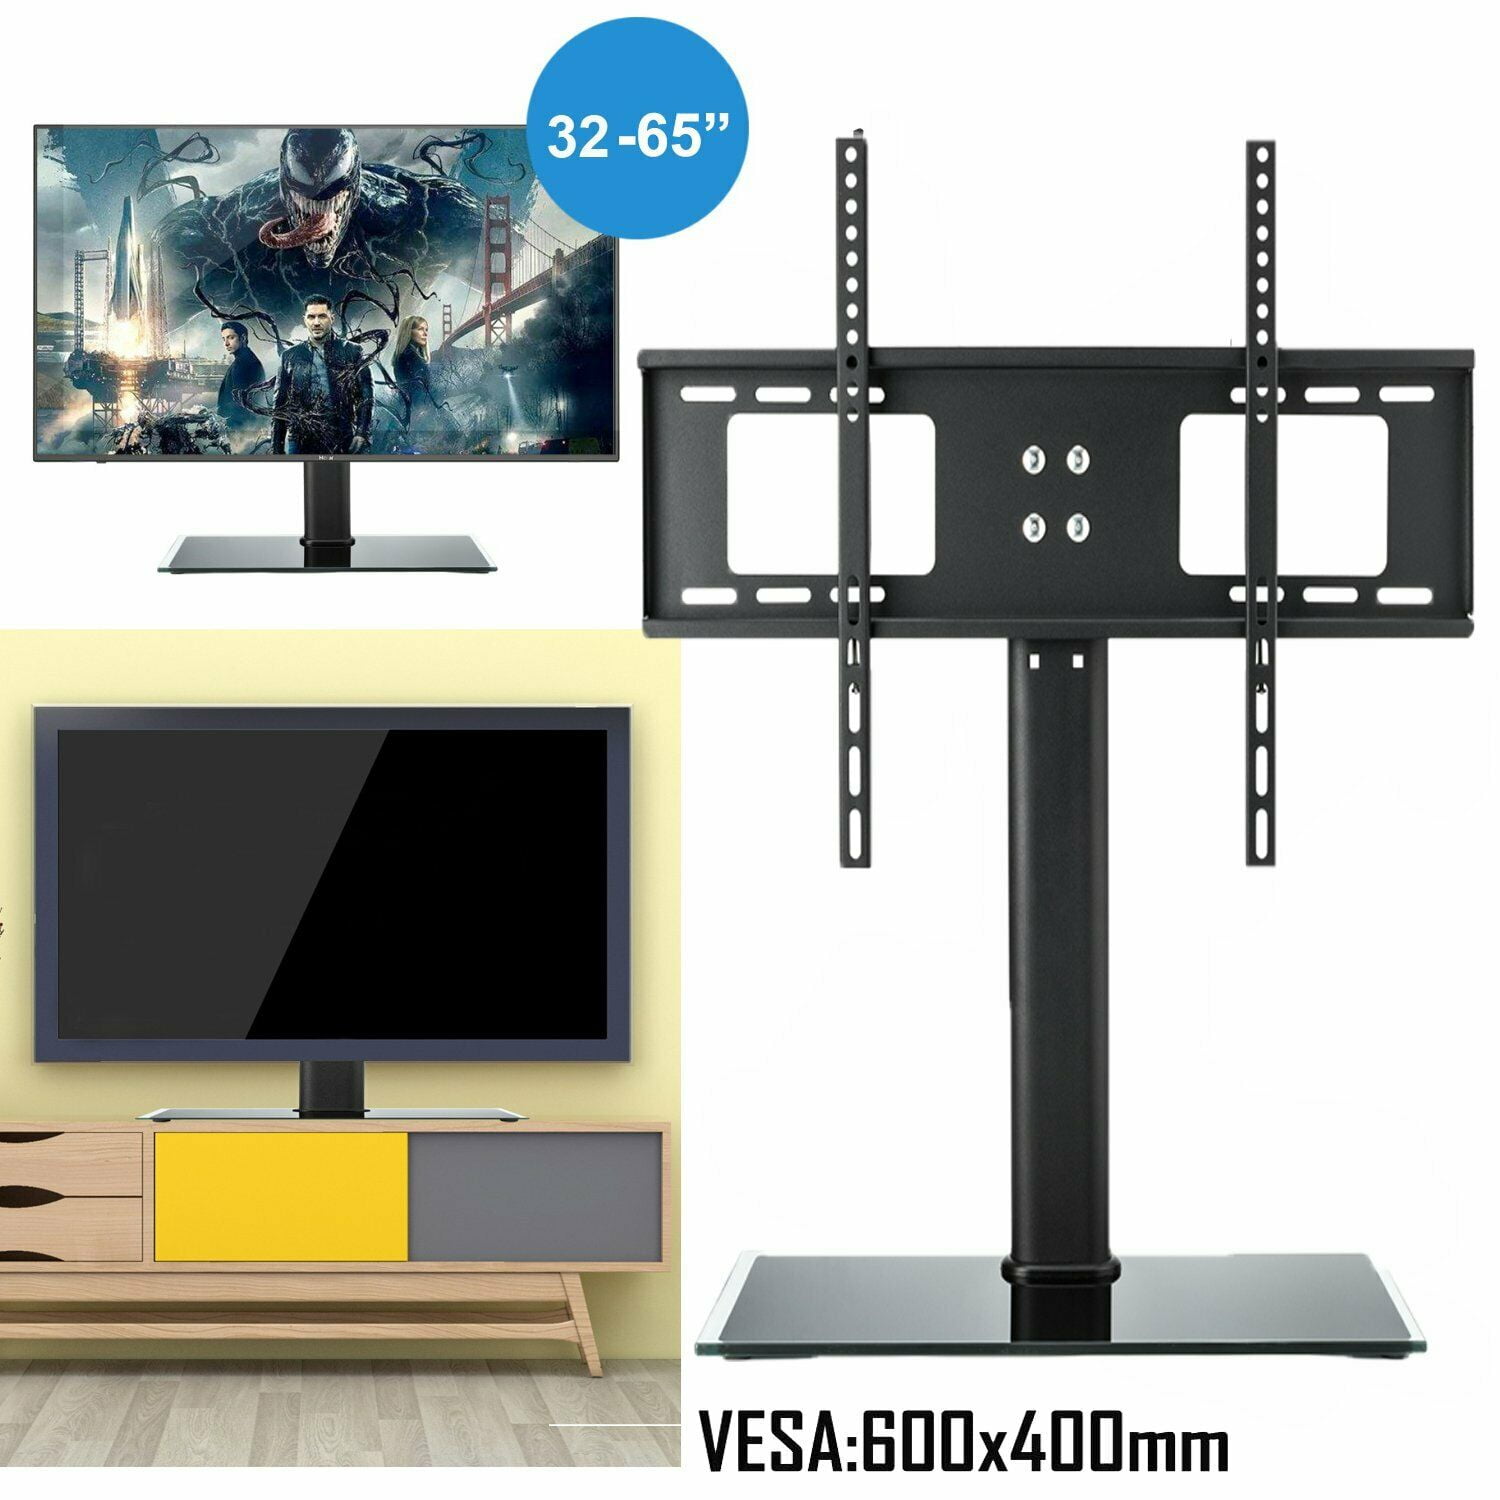 Holds up to 60kgs Universal Table Top TV Stand Base VESA Pedestal Mount for 27 inch to 55 inch TVs with Cable Management and Height Adjustable 